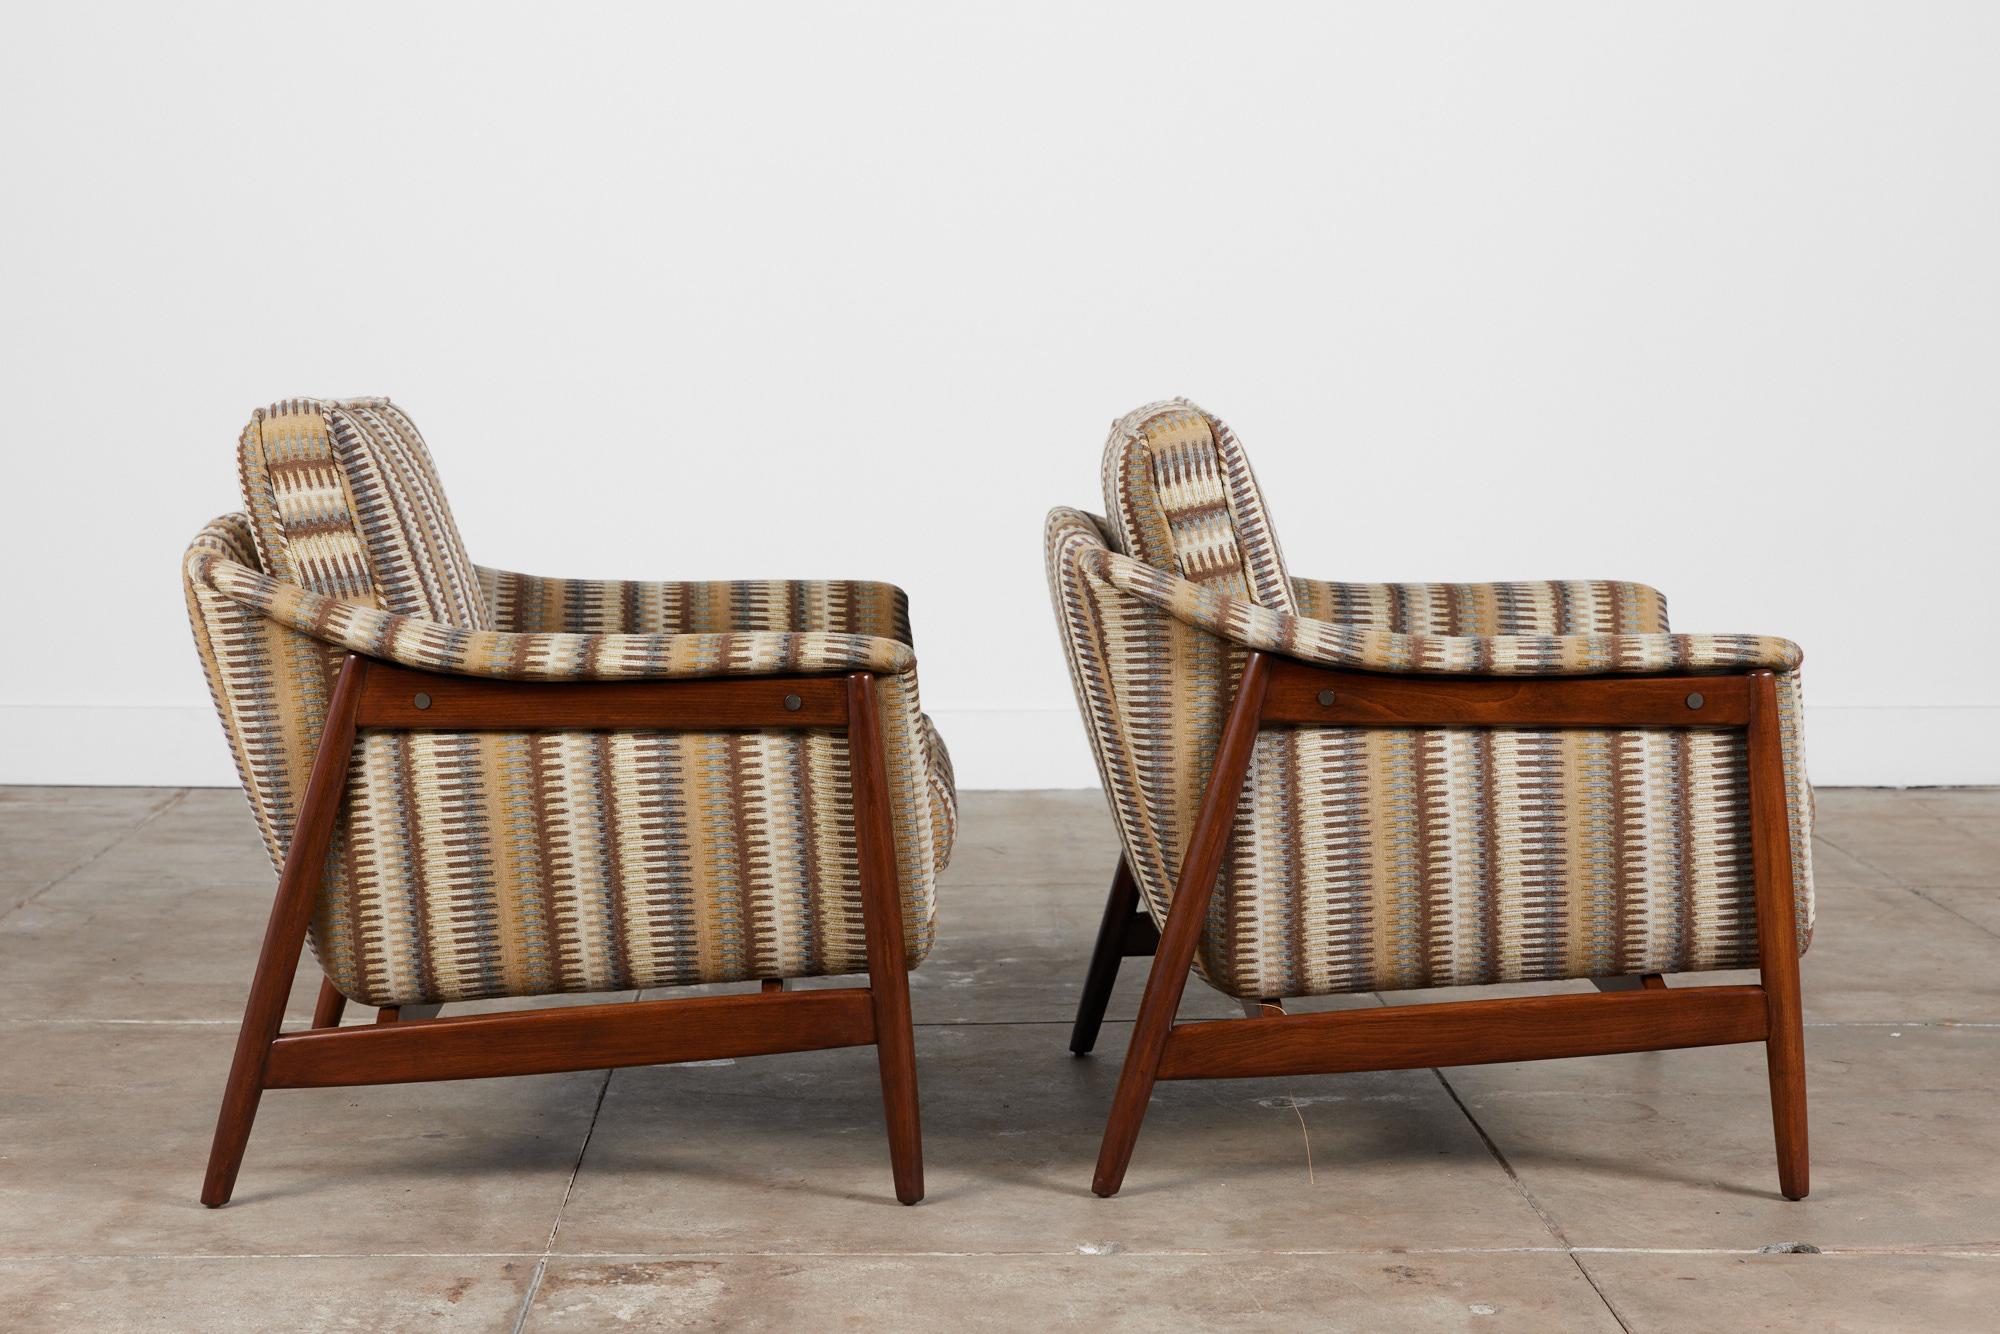 Upholstery Pair of Folke Ohlsson Lounge Chairs for DUX